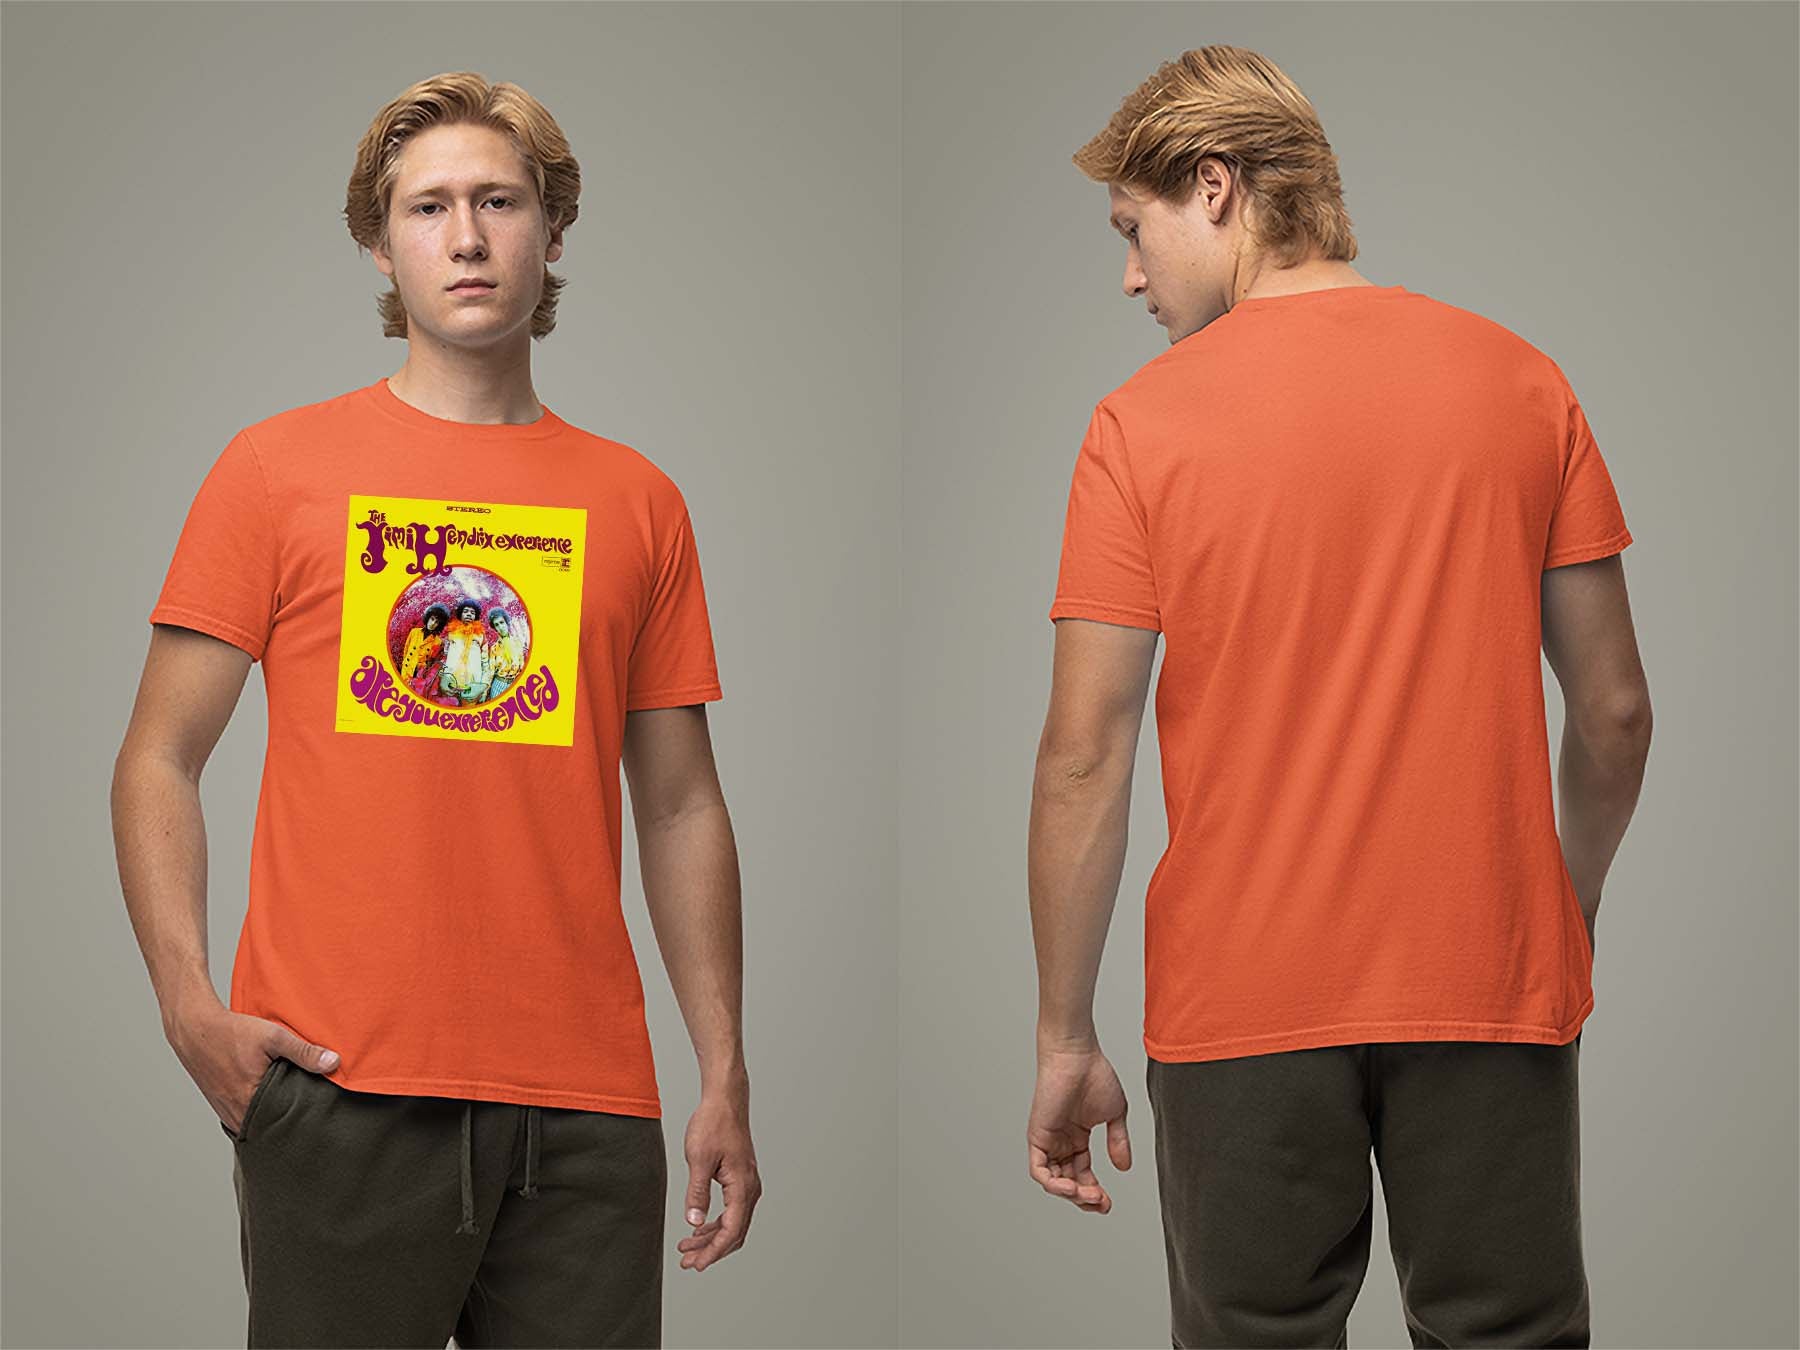 Are You Experienced T-Shirt Small Orange